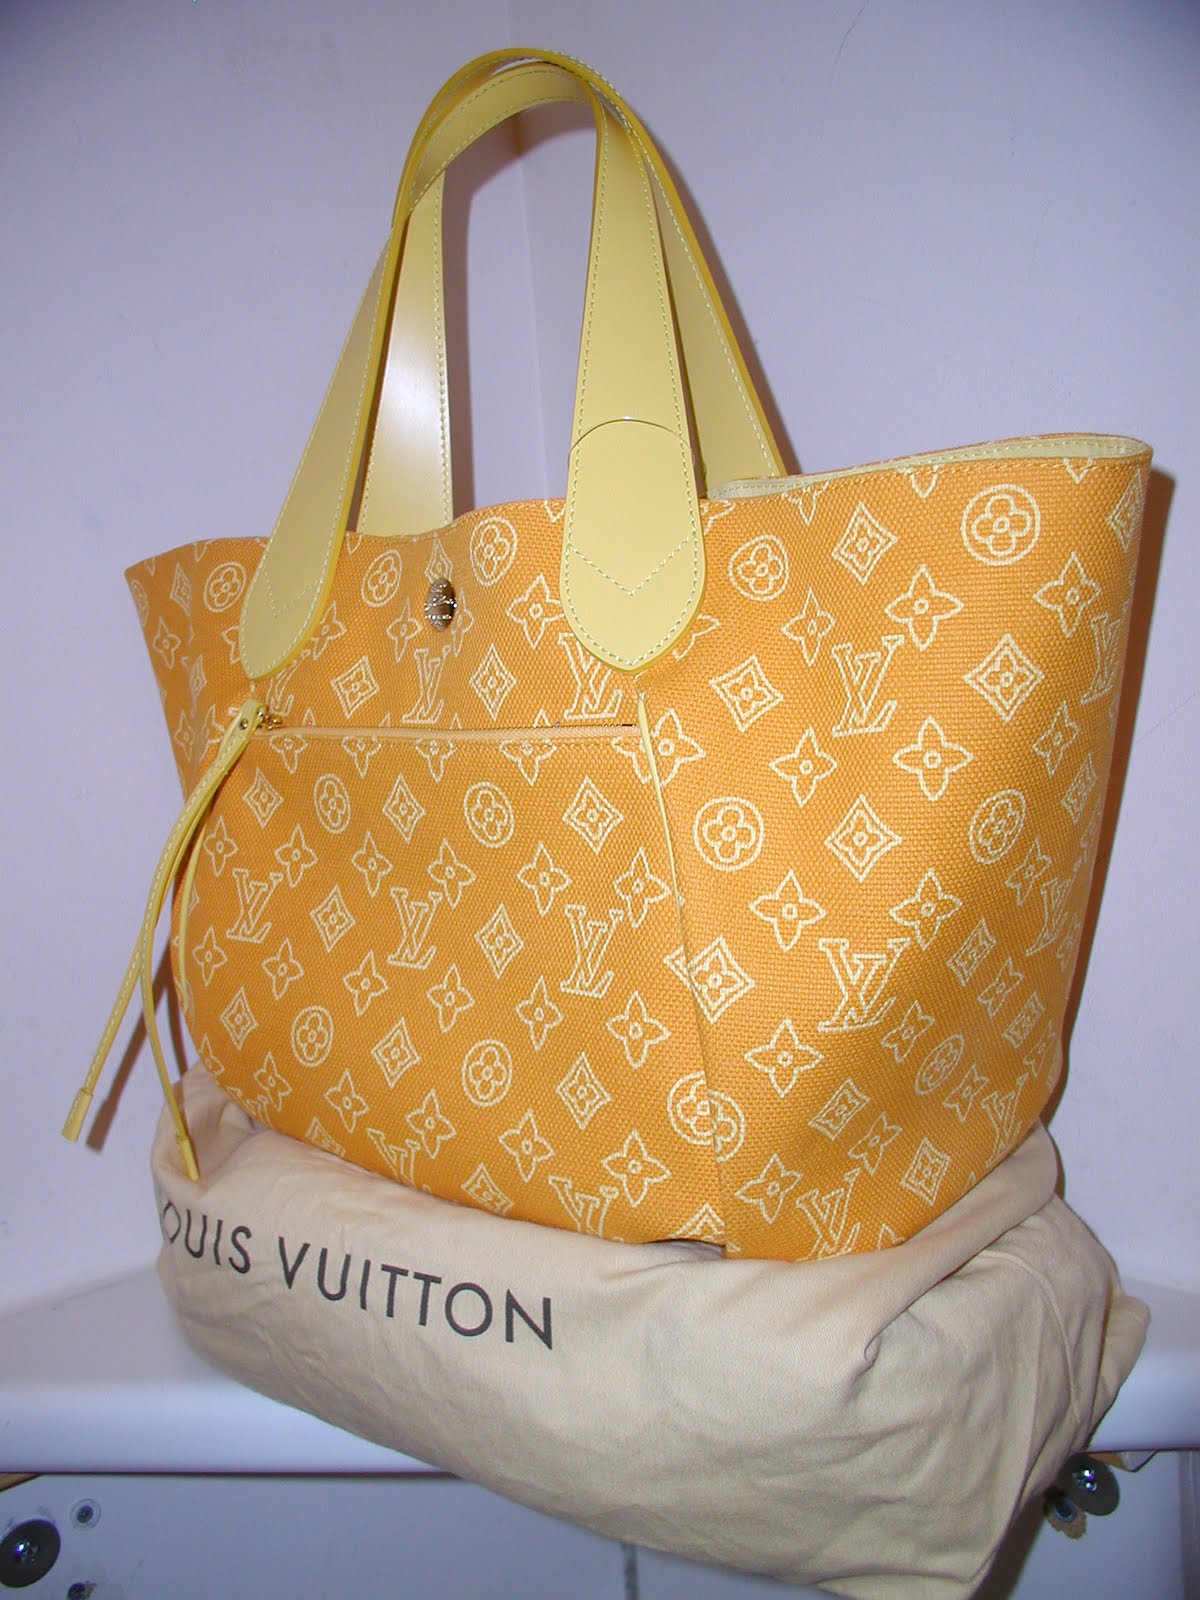 Uptown Consignment: Brand new LV Bag